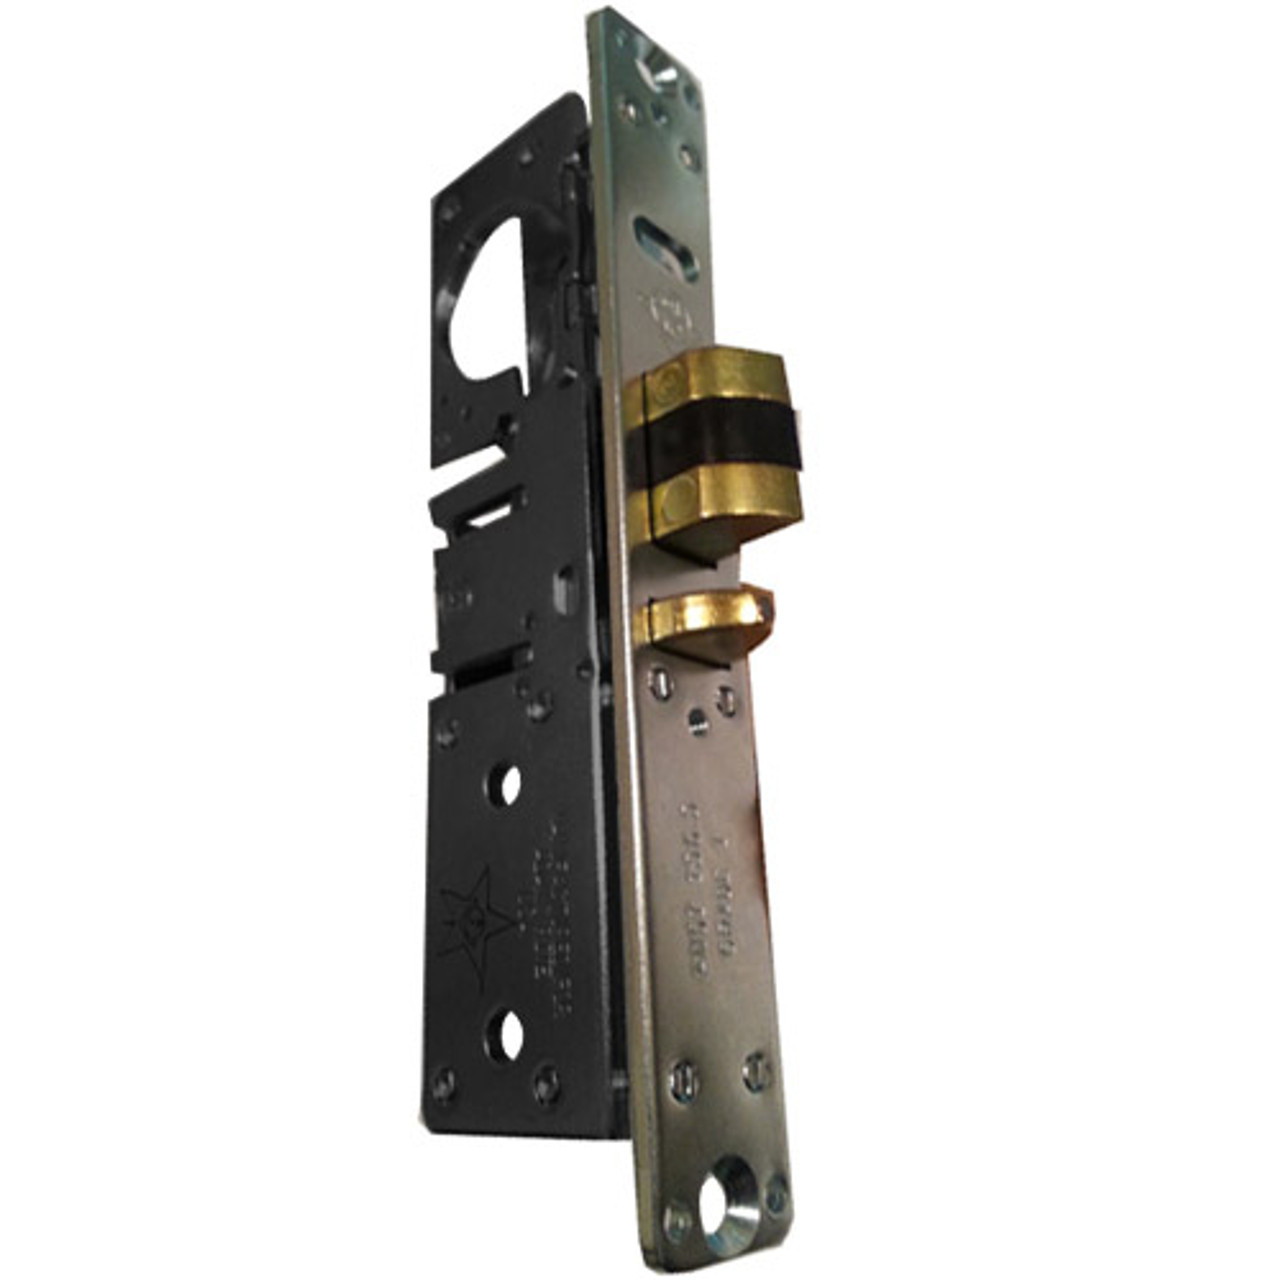 4511W-16-201-335 Adams Rite Standard Deadlatch with Radius Faceplate with weatherstrip in Black Anodized Finish